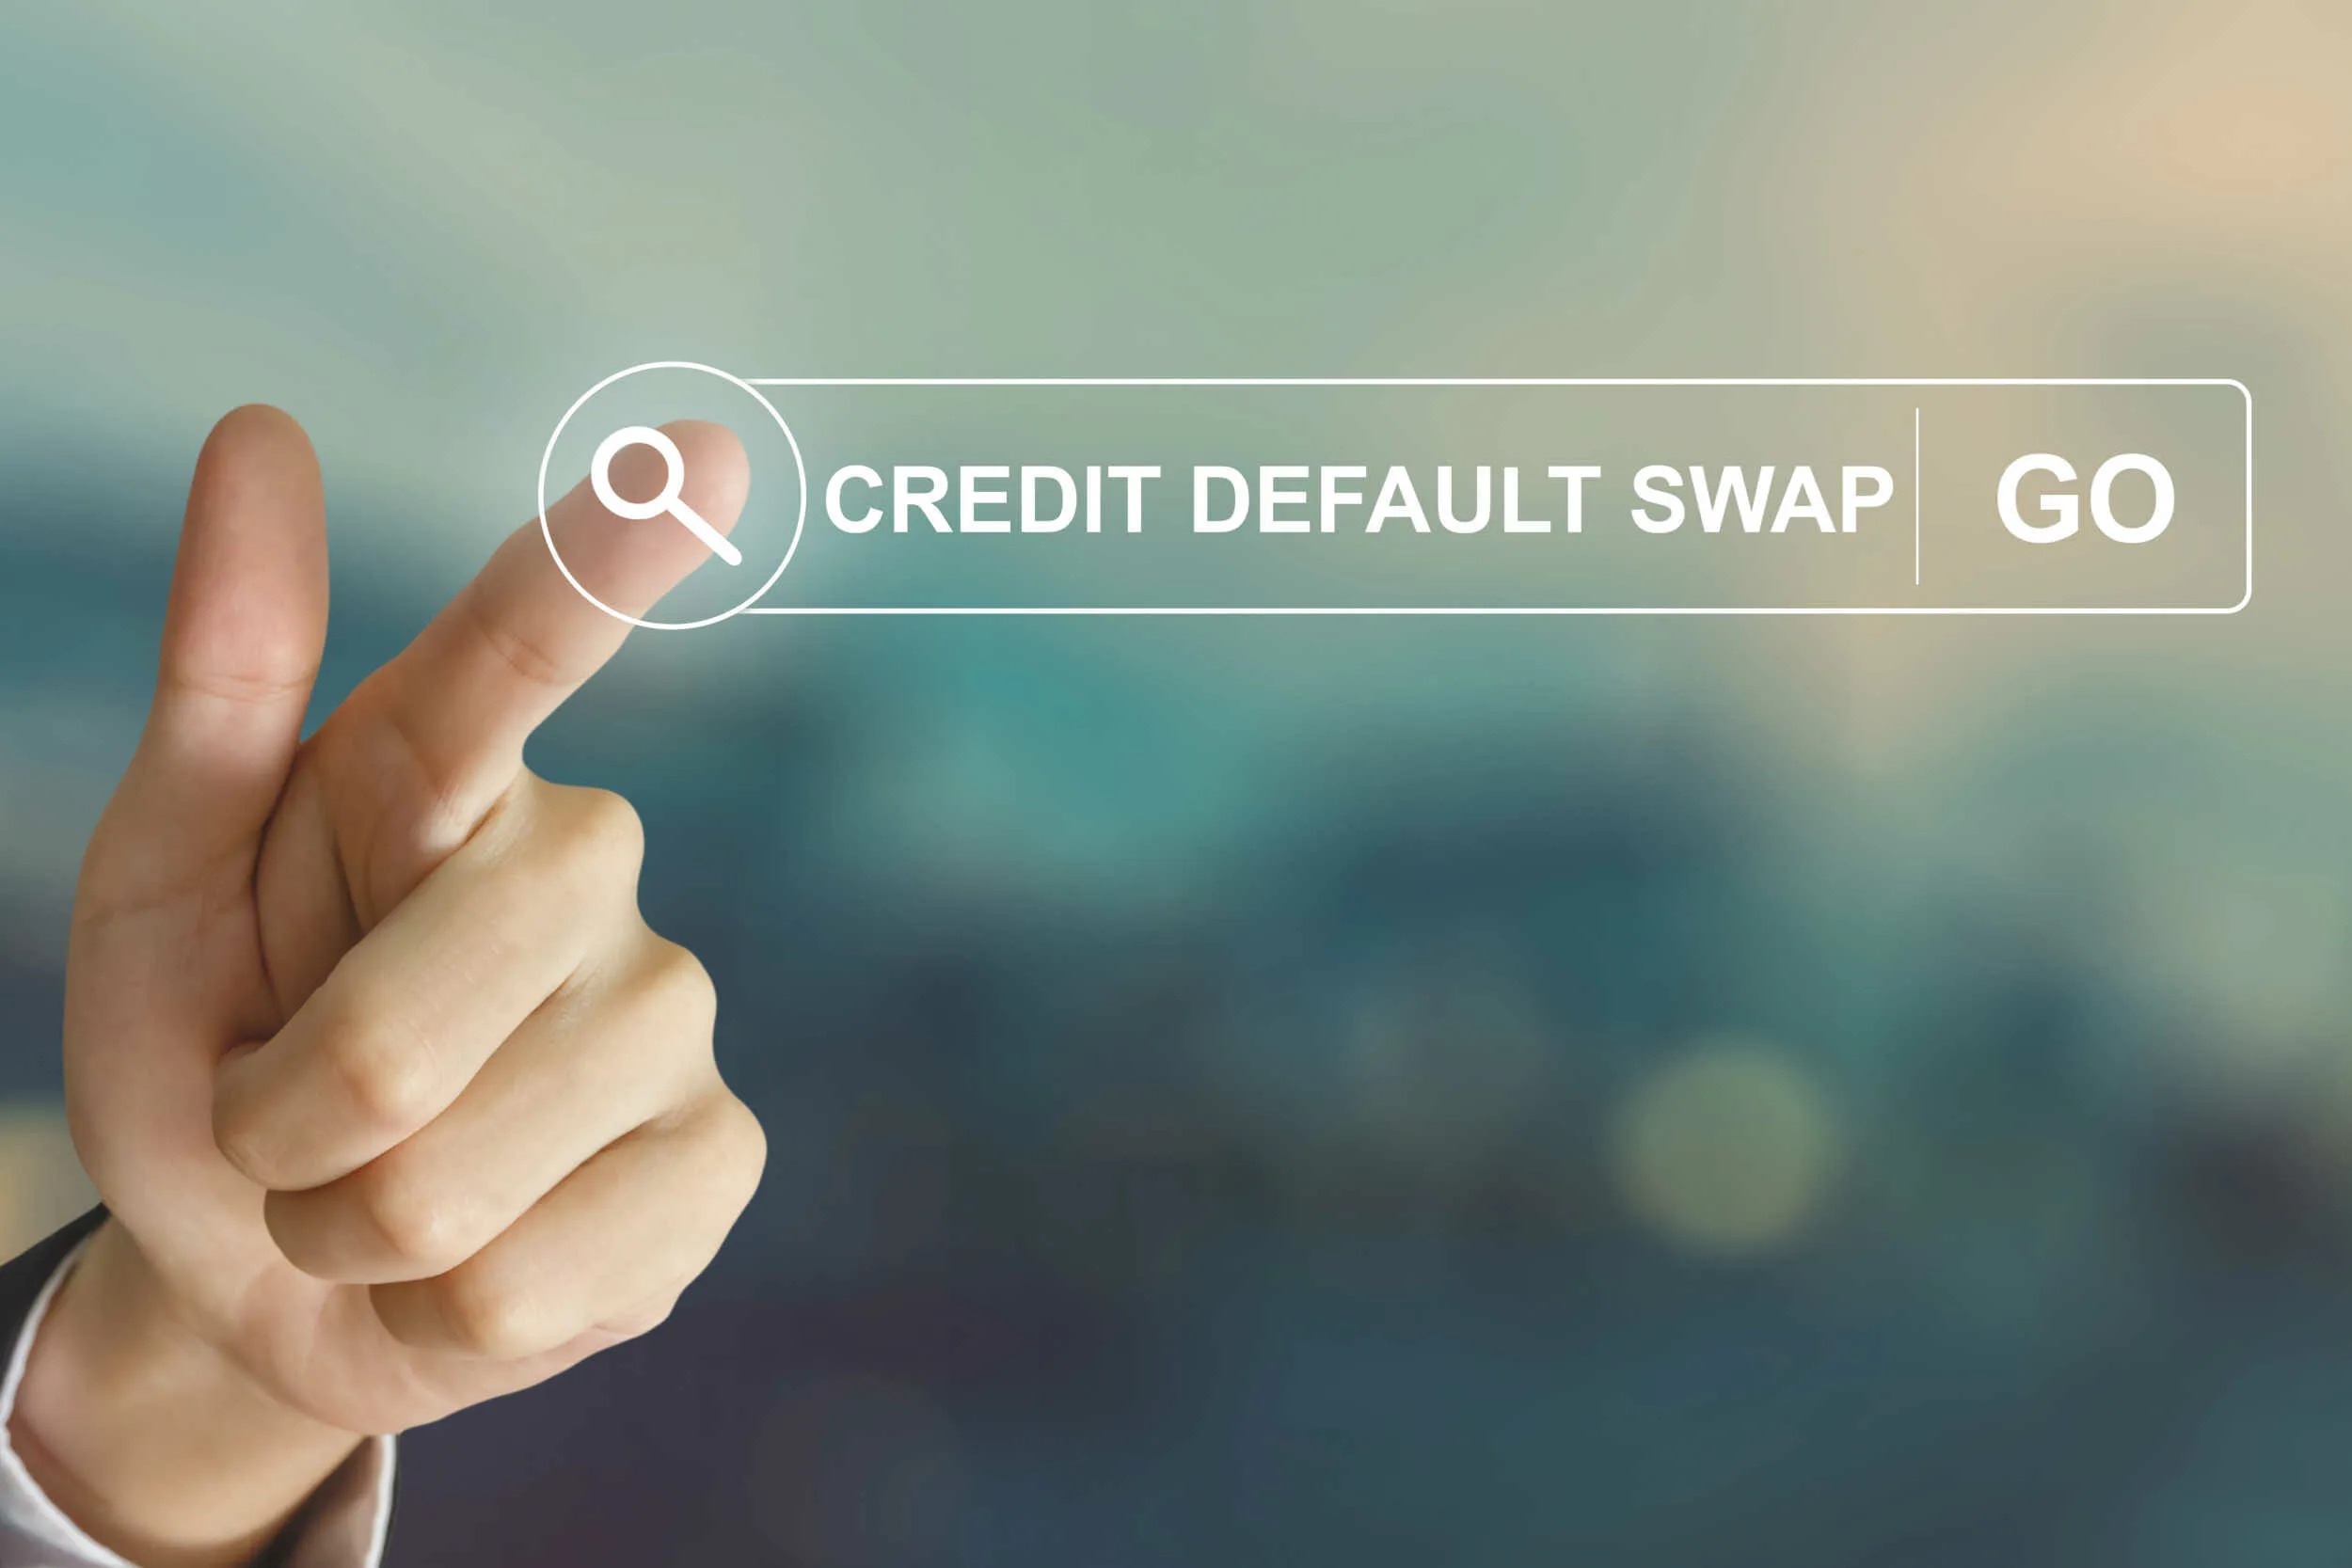 In What Currency Are Credit Default Swaps Traded